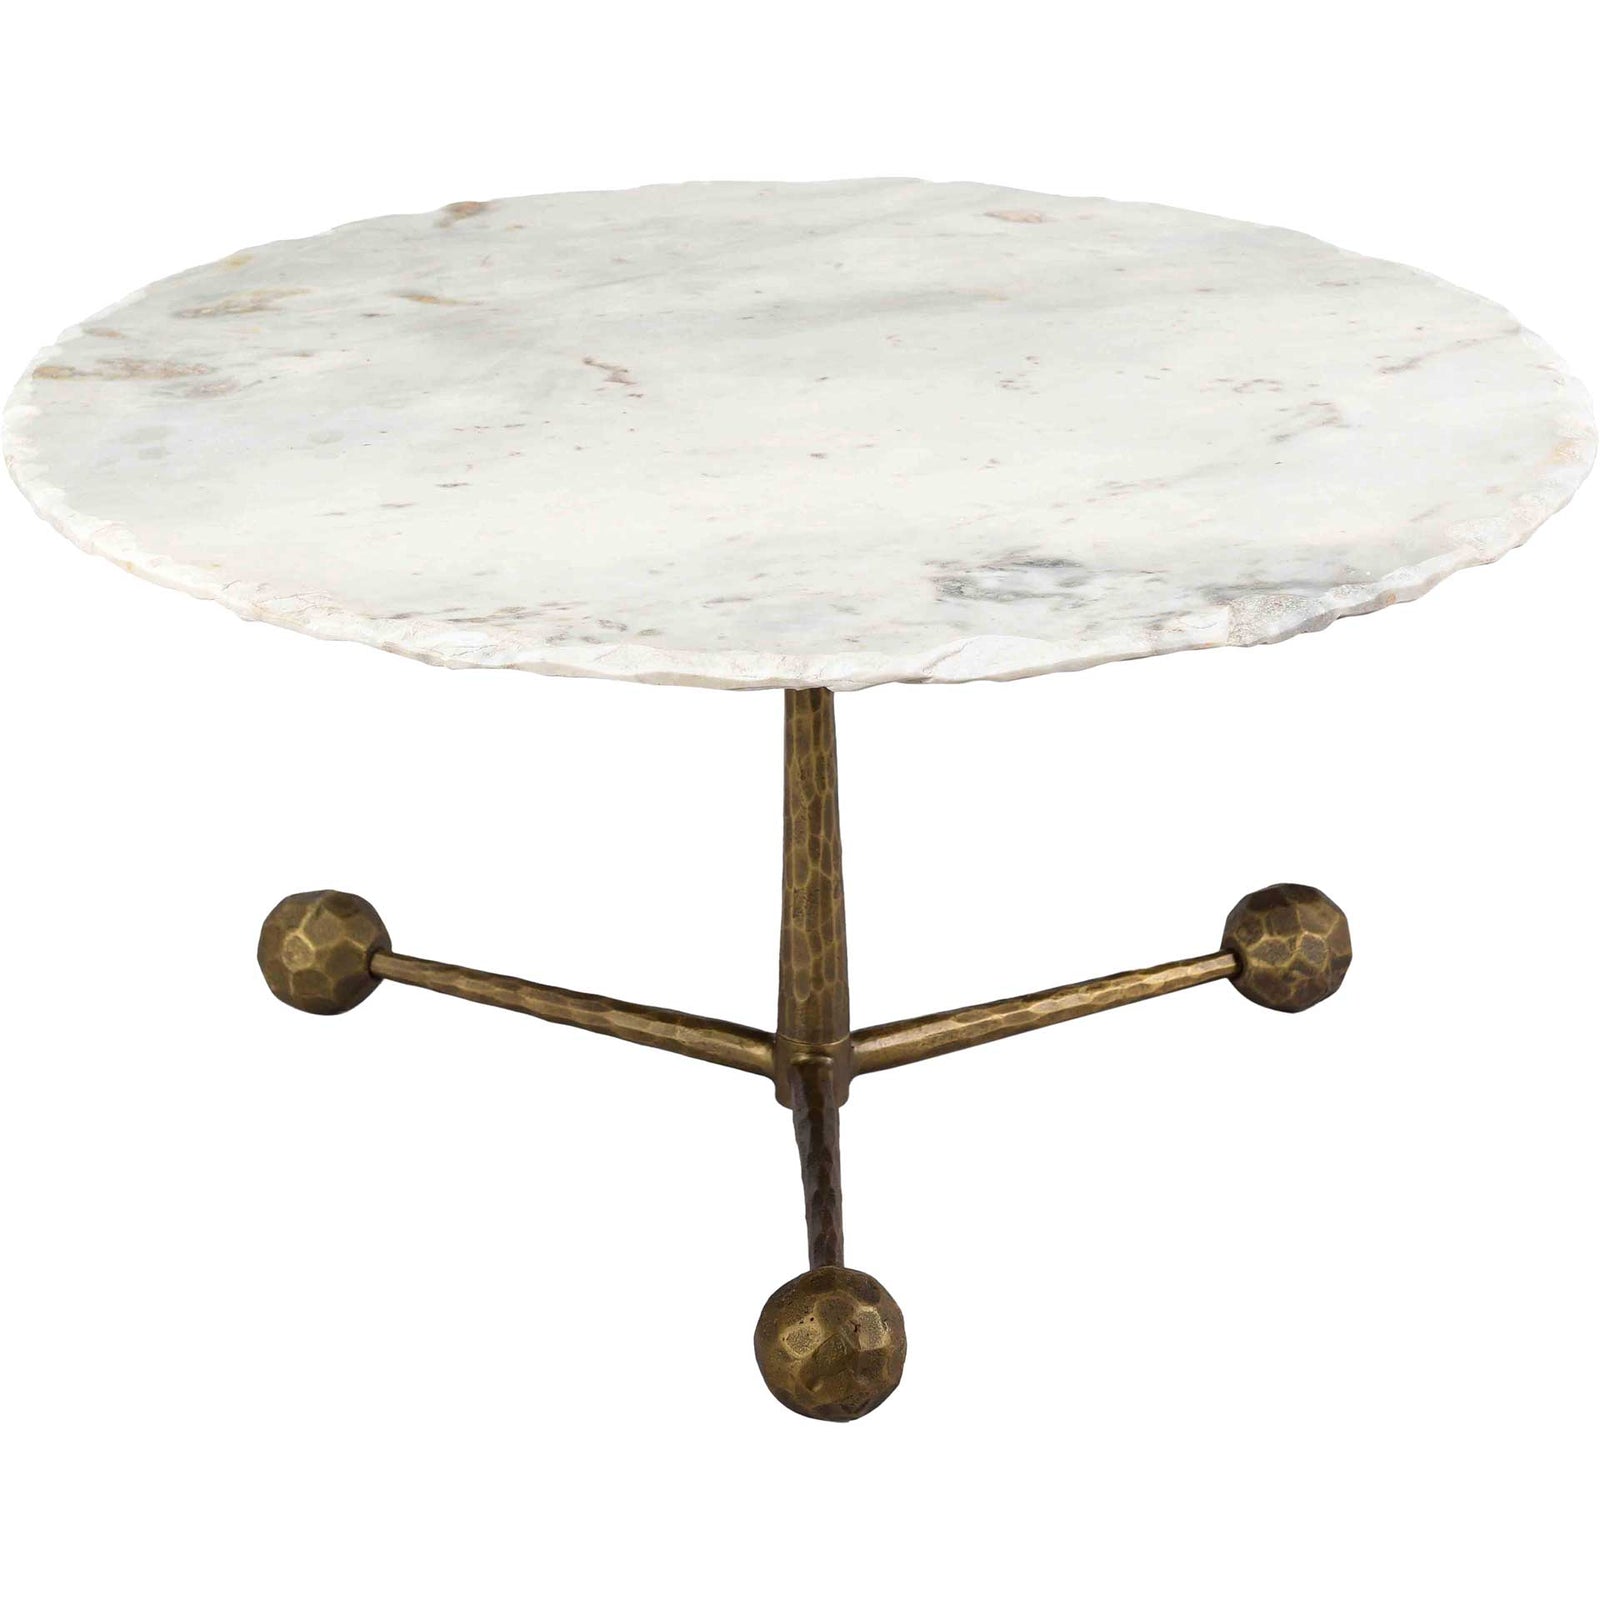 Orabella Marble Coffee Table White Marble